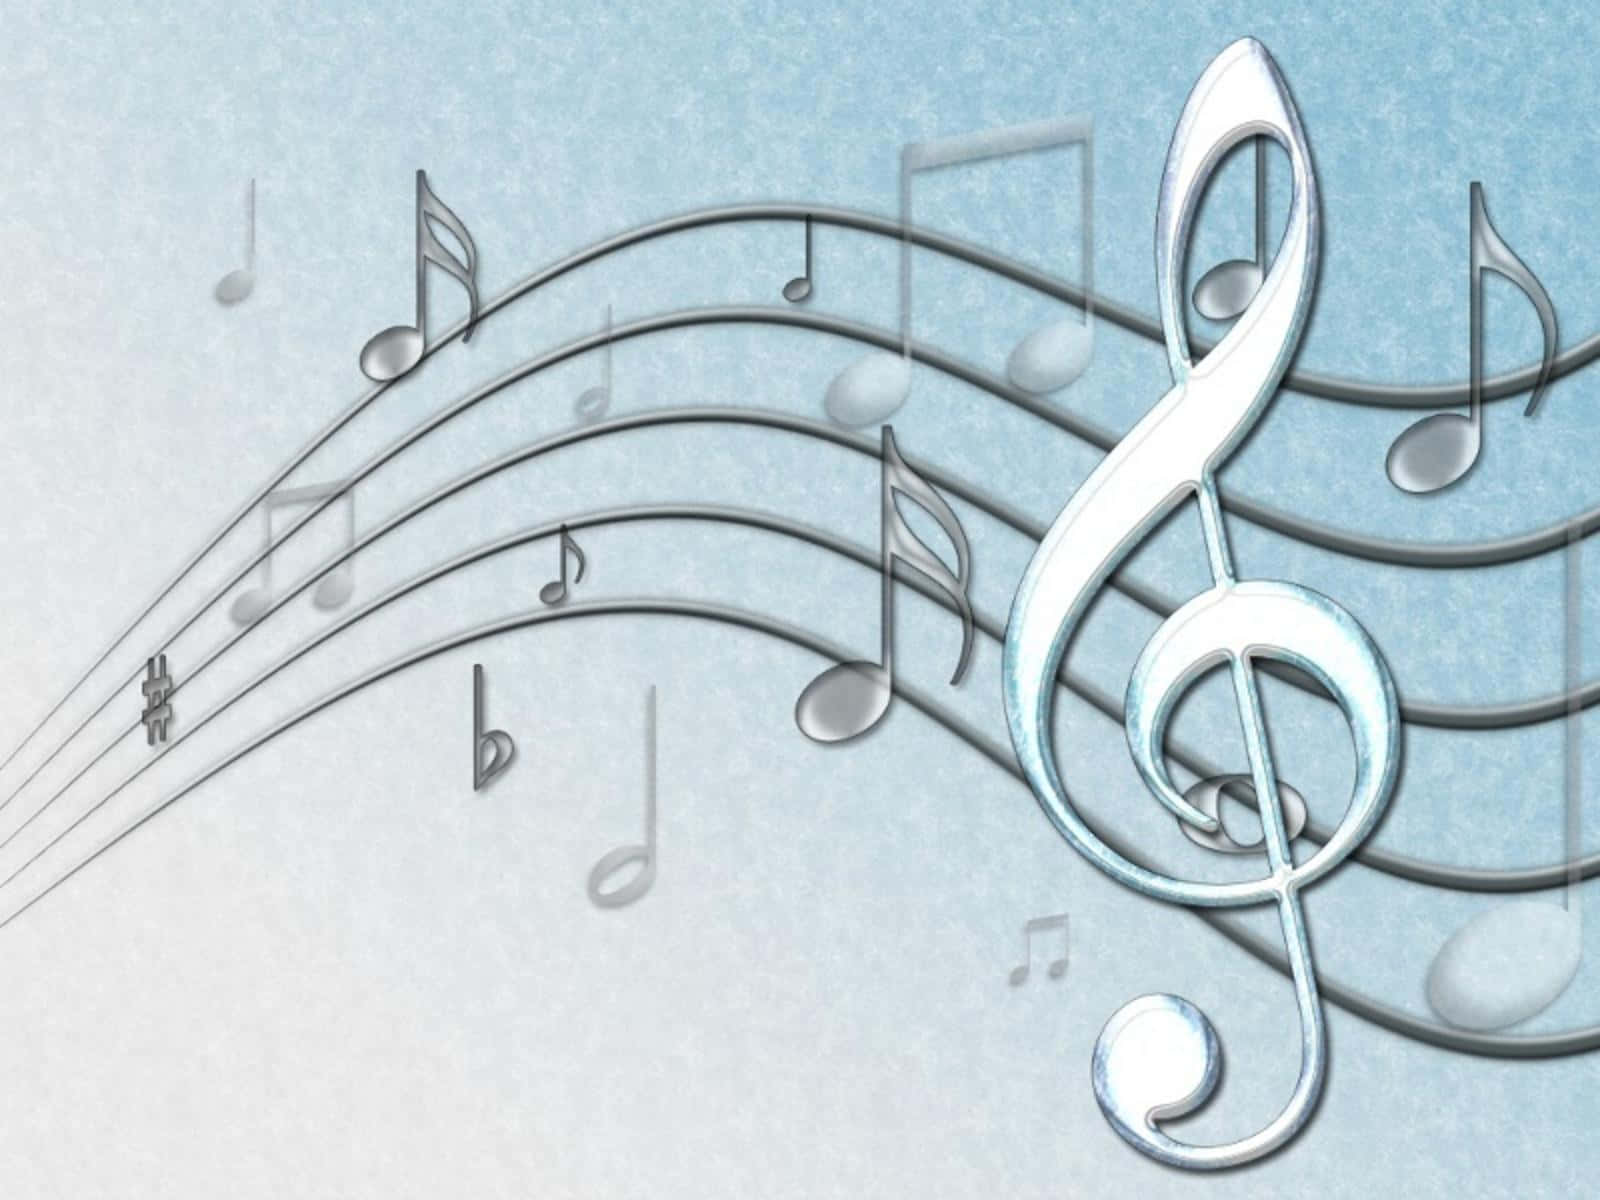 "Let Music Note Inspire You!" Wallpaper